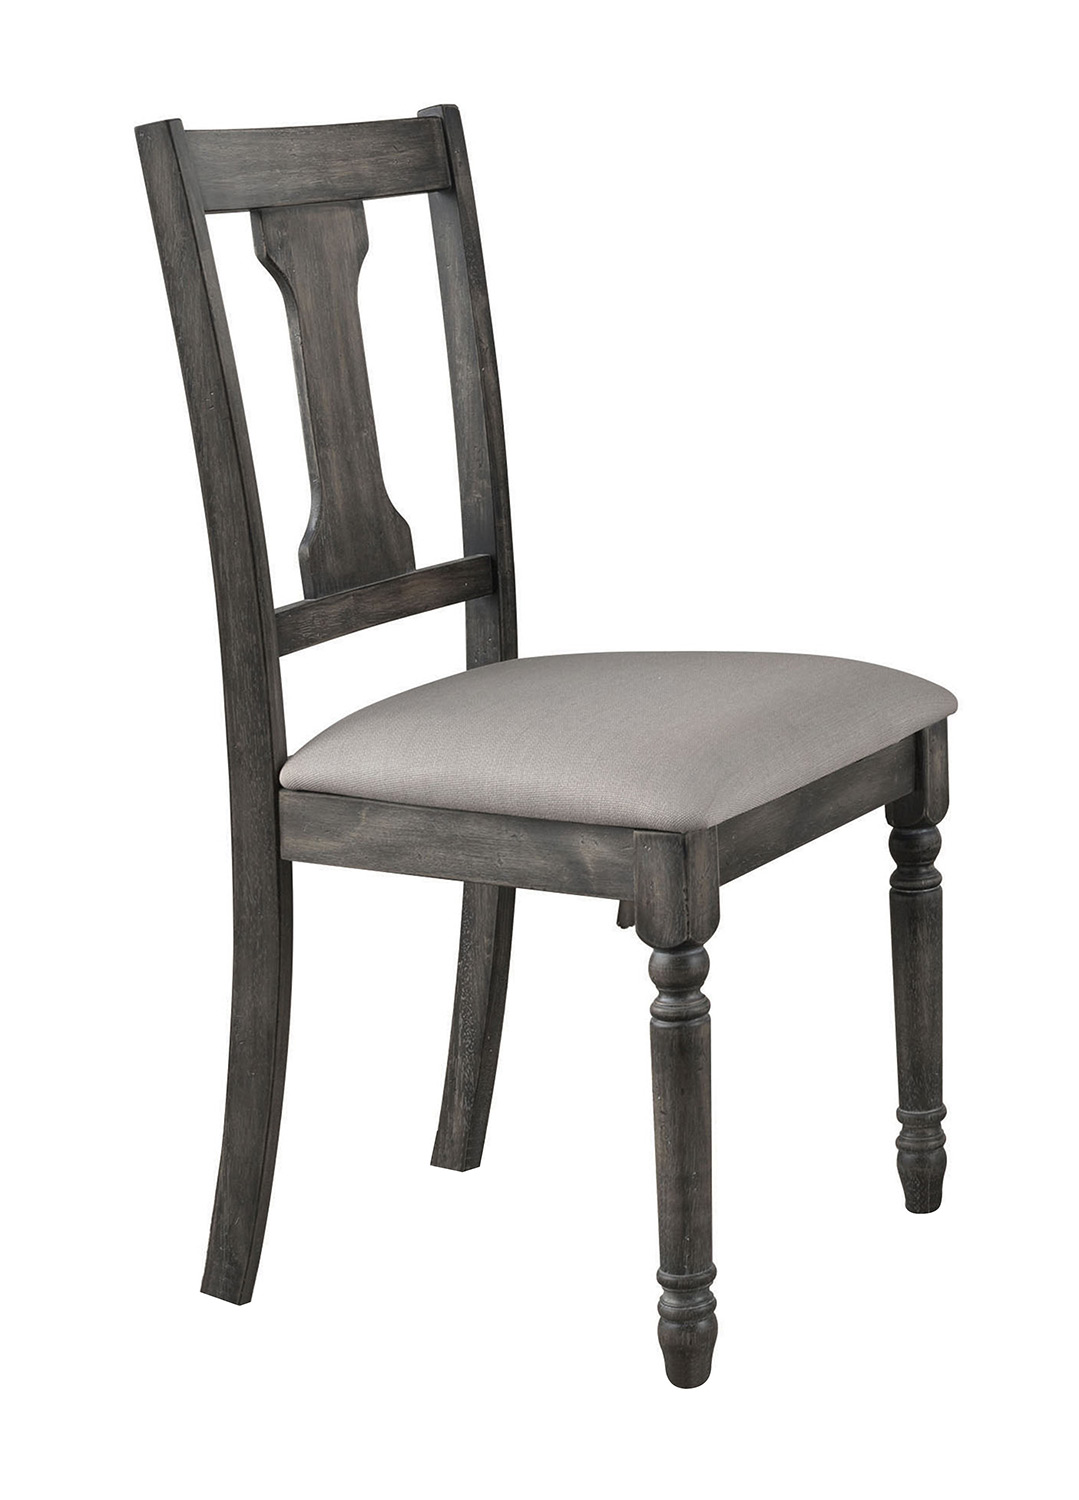 Acme Wallace Side Chair - Tan Linen/Weathered Gray